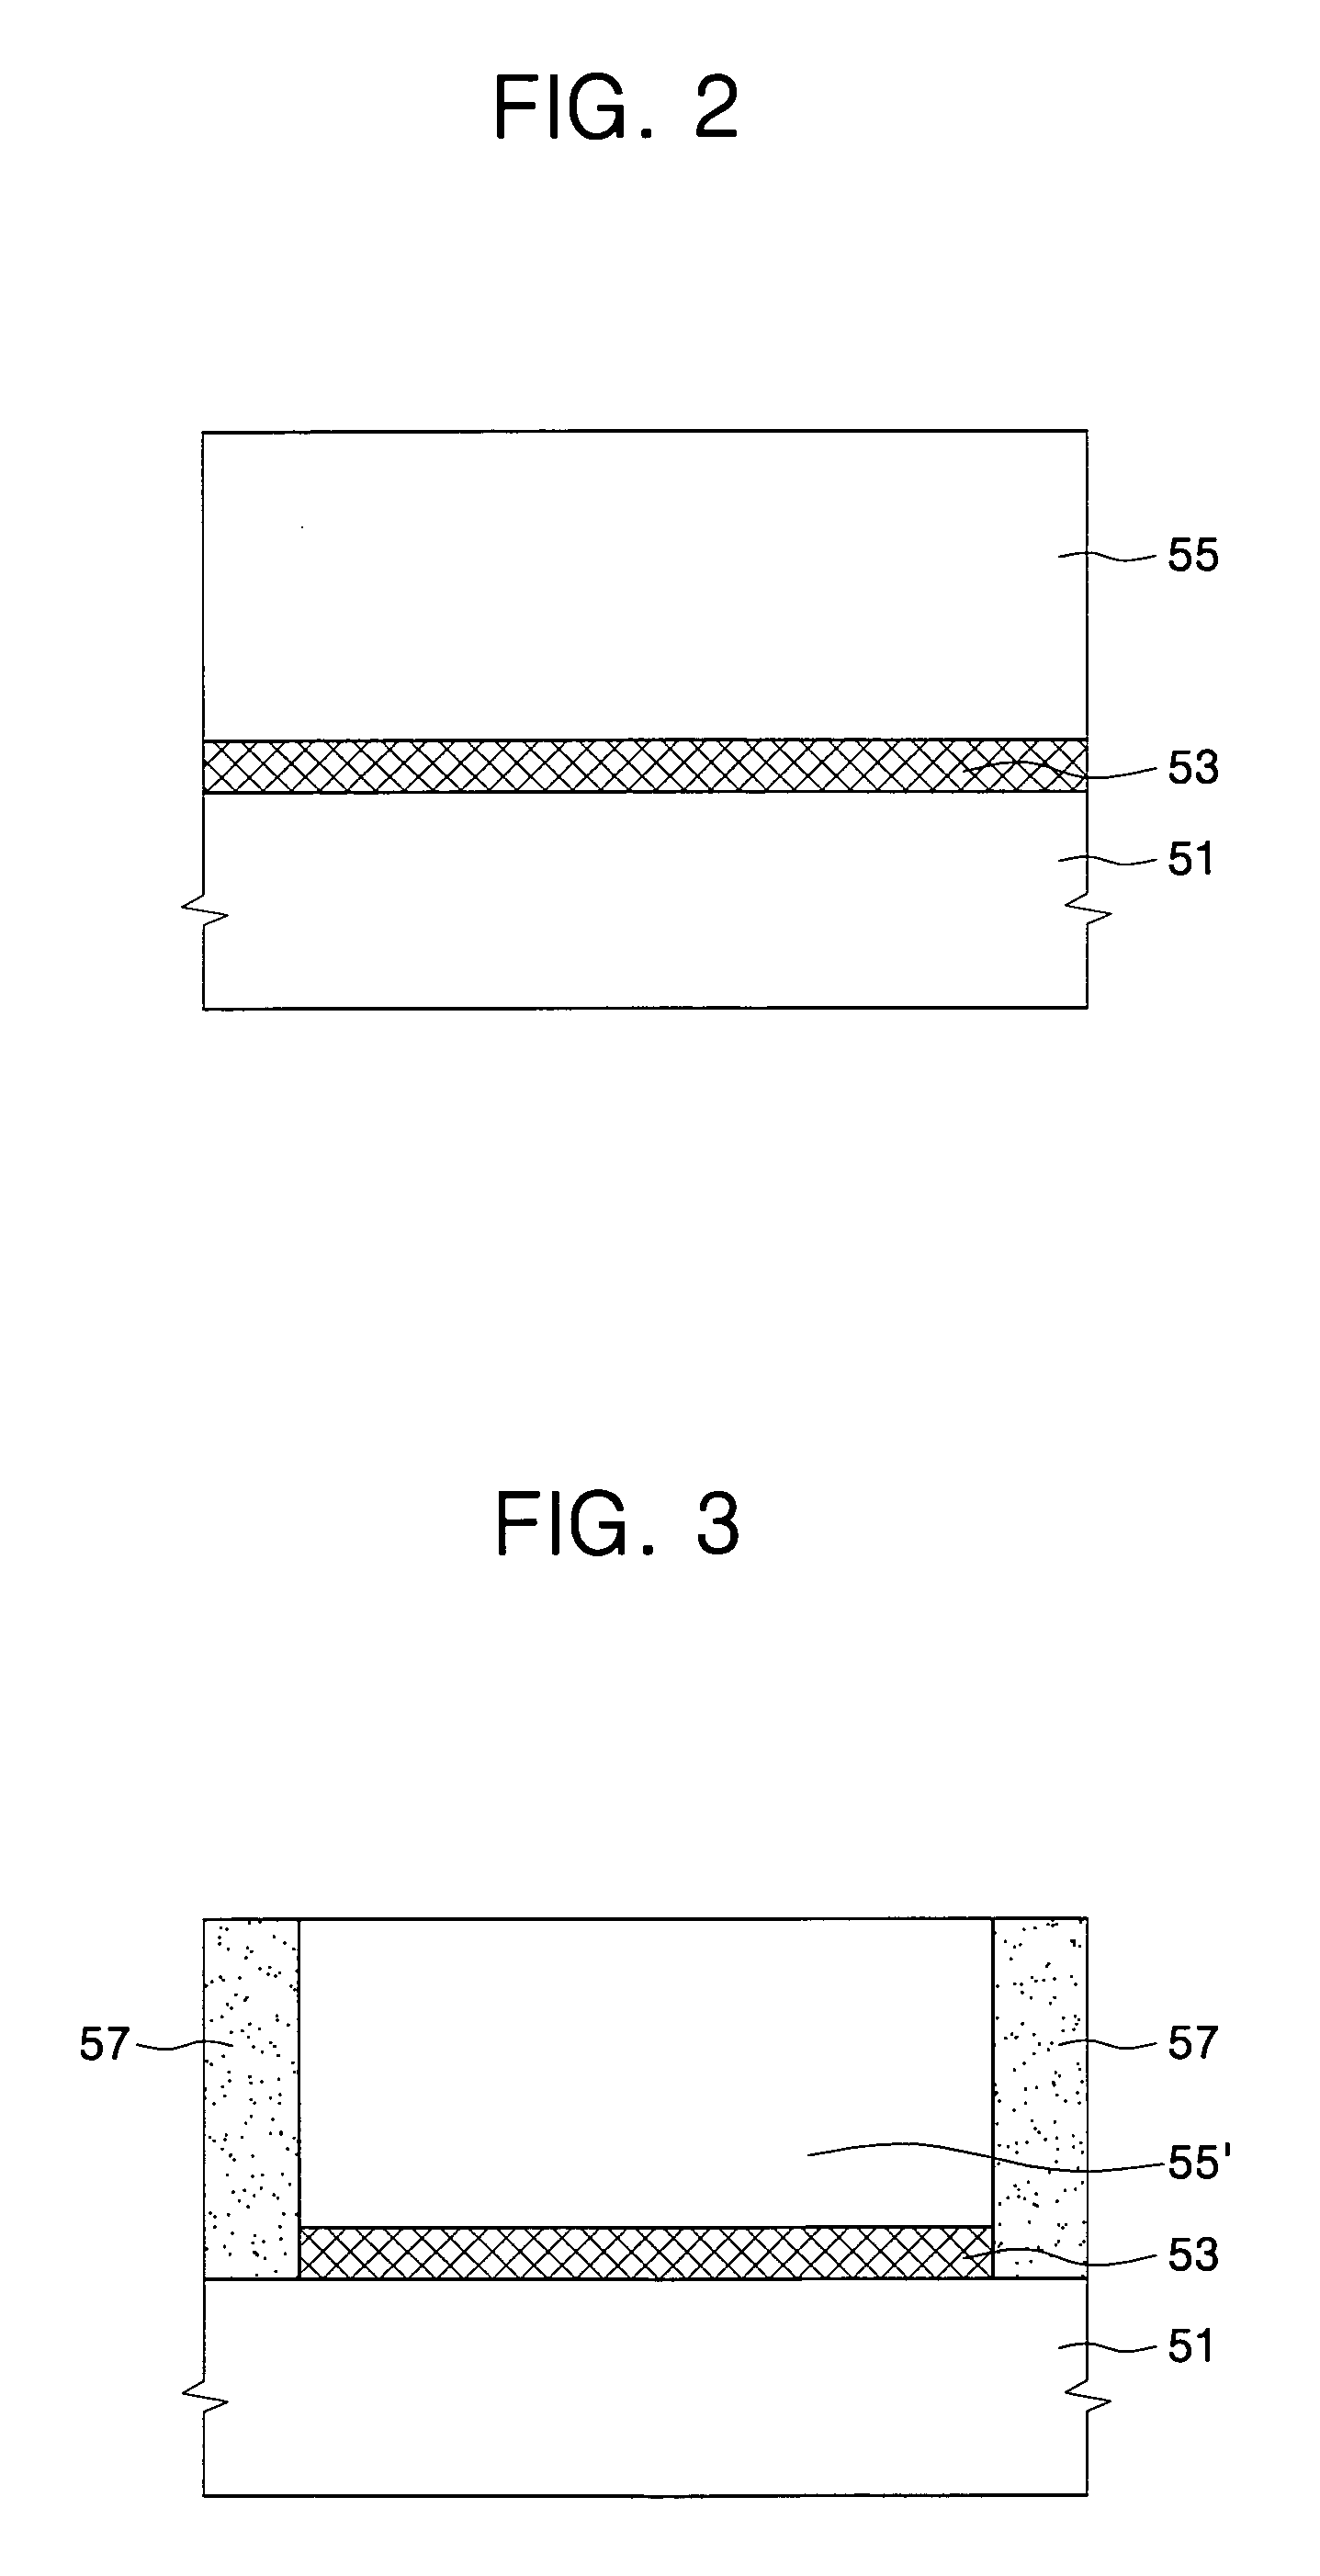 Single transistor floating body DRAM cell having recess channel transistor structure and method of fabricating the same